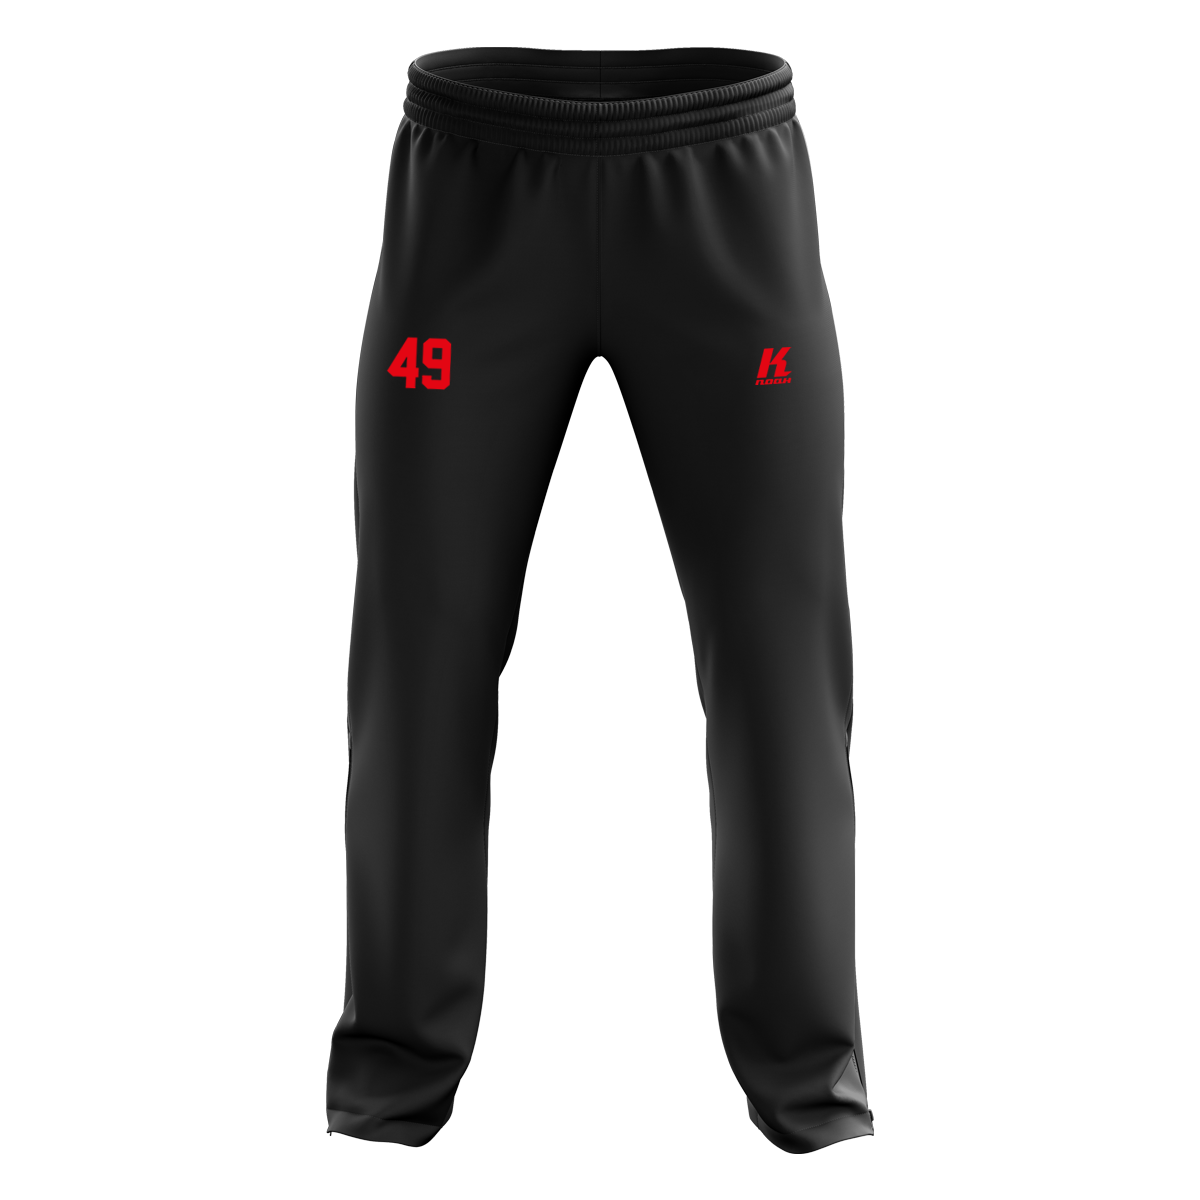 S-Hammers Tracksuit Pant Windstop with Playernumber/Initials